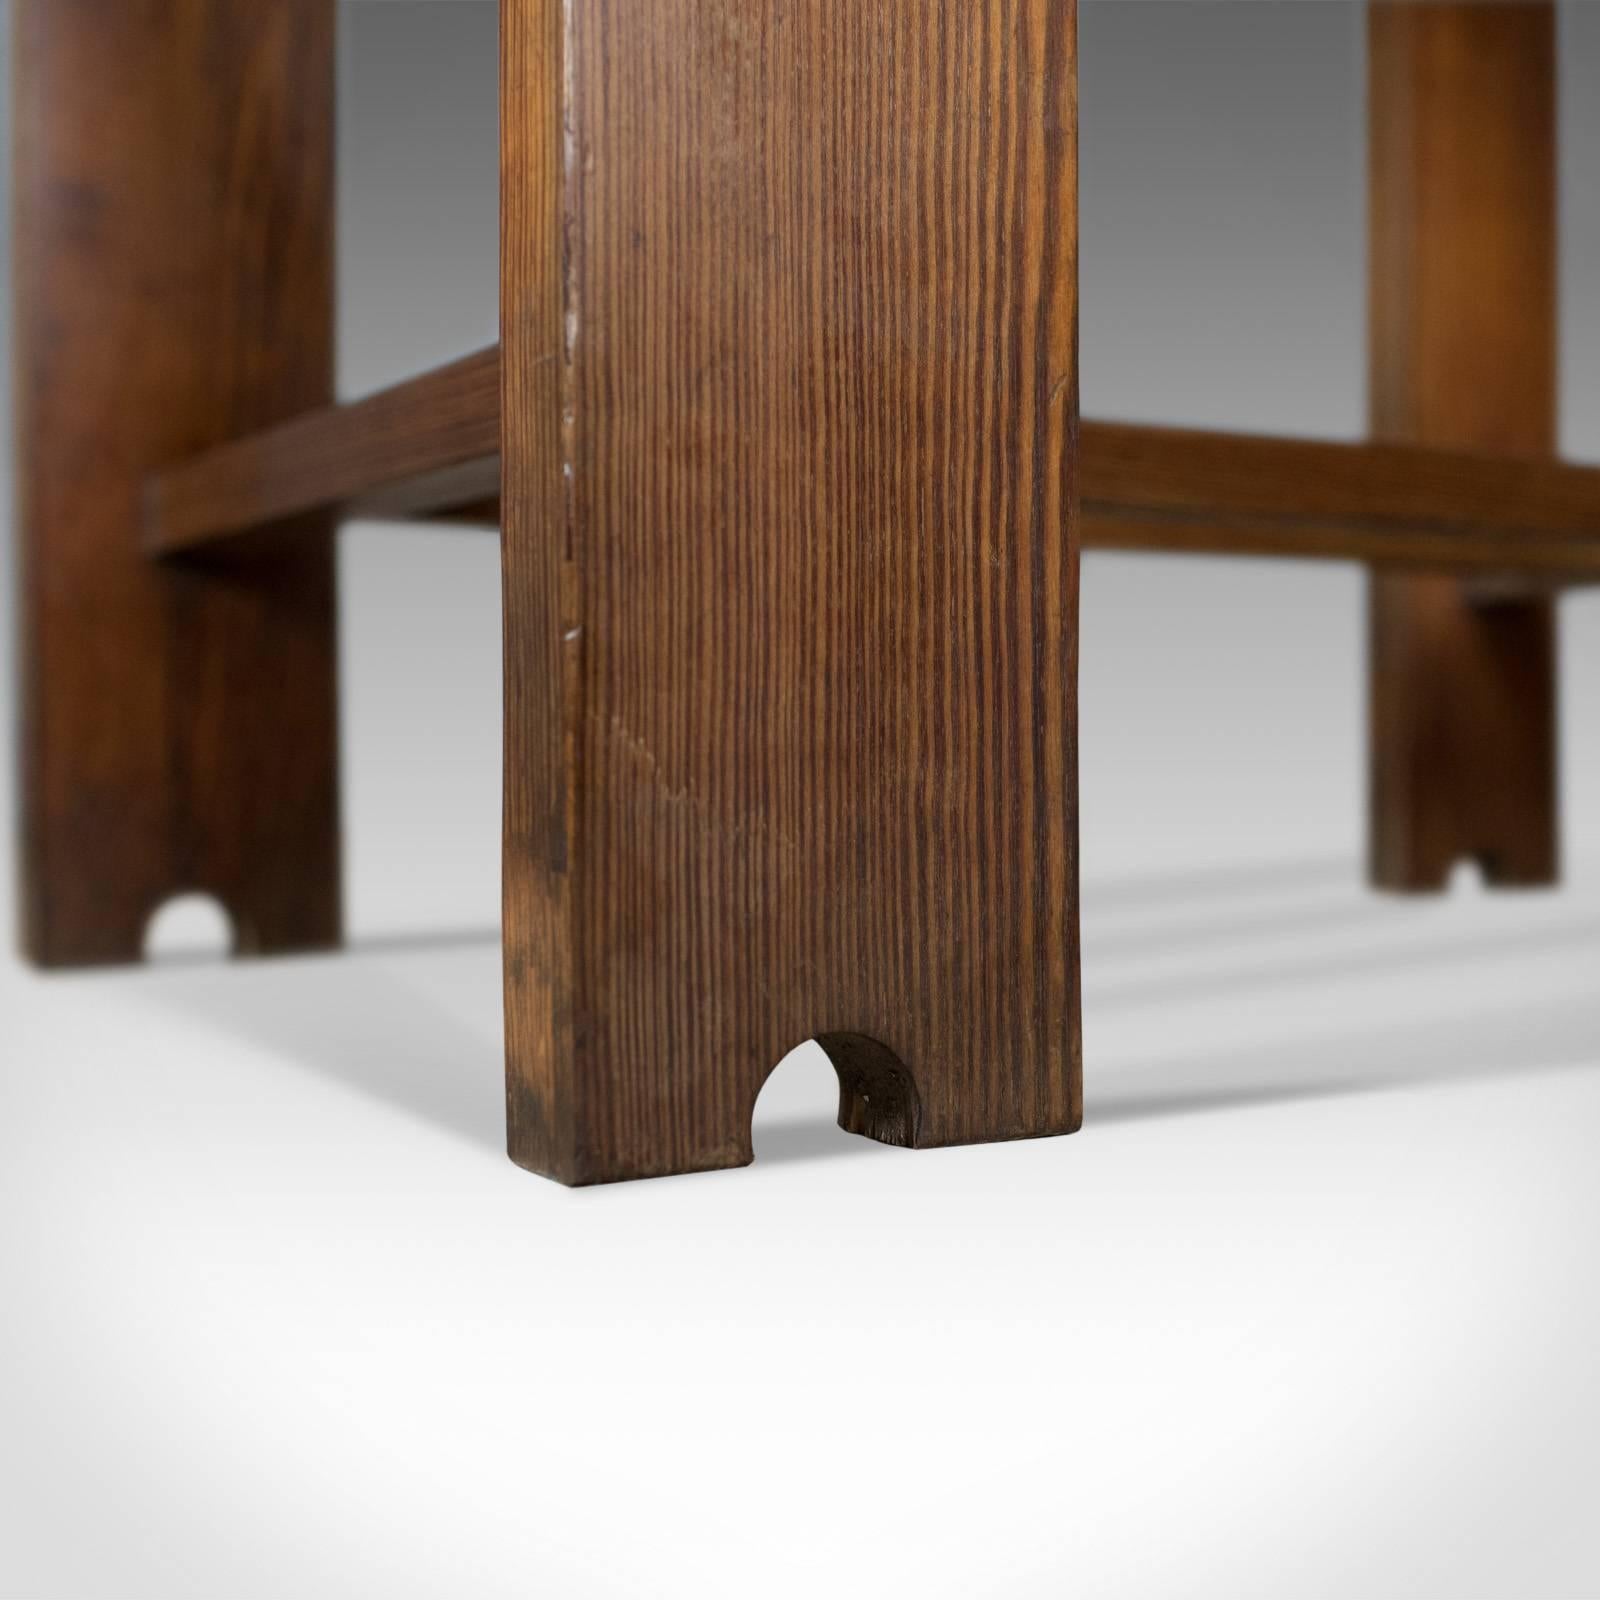 19th Century Antique Console Table, English, Arts & Crafts, Victorian, Pine, Side, circa 1880